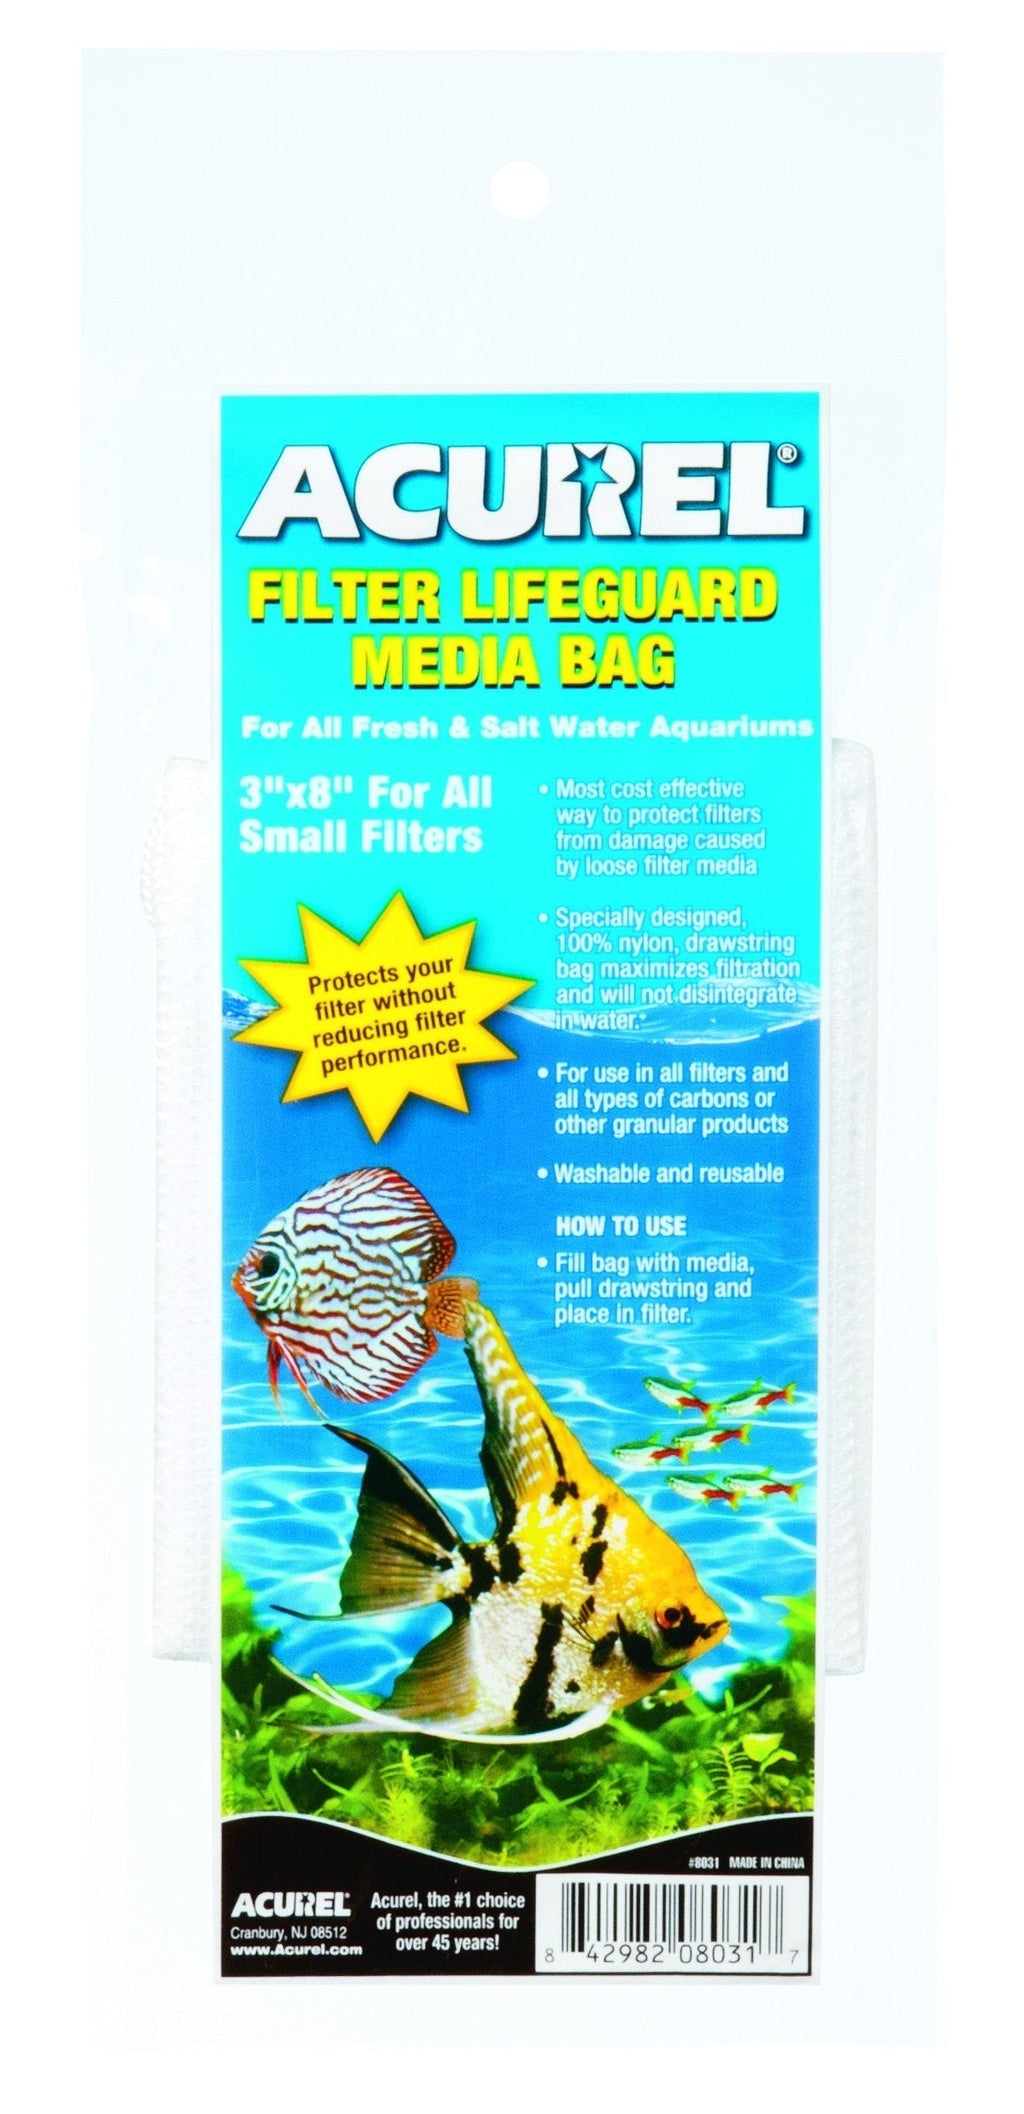 [Australia] - Acurel Filter Lifeguard Media Bag 3-Inch by 8-Inch 